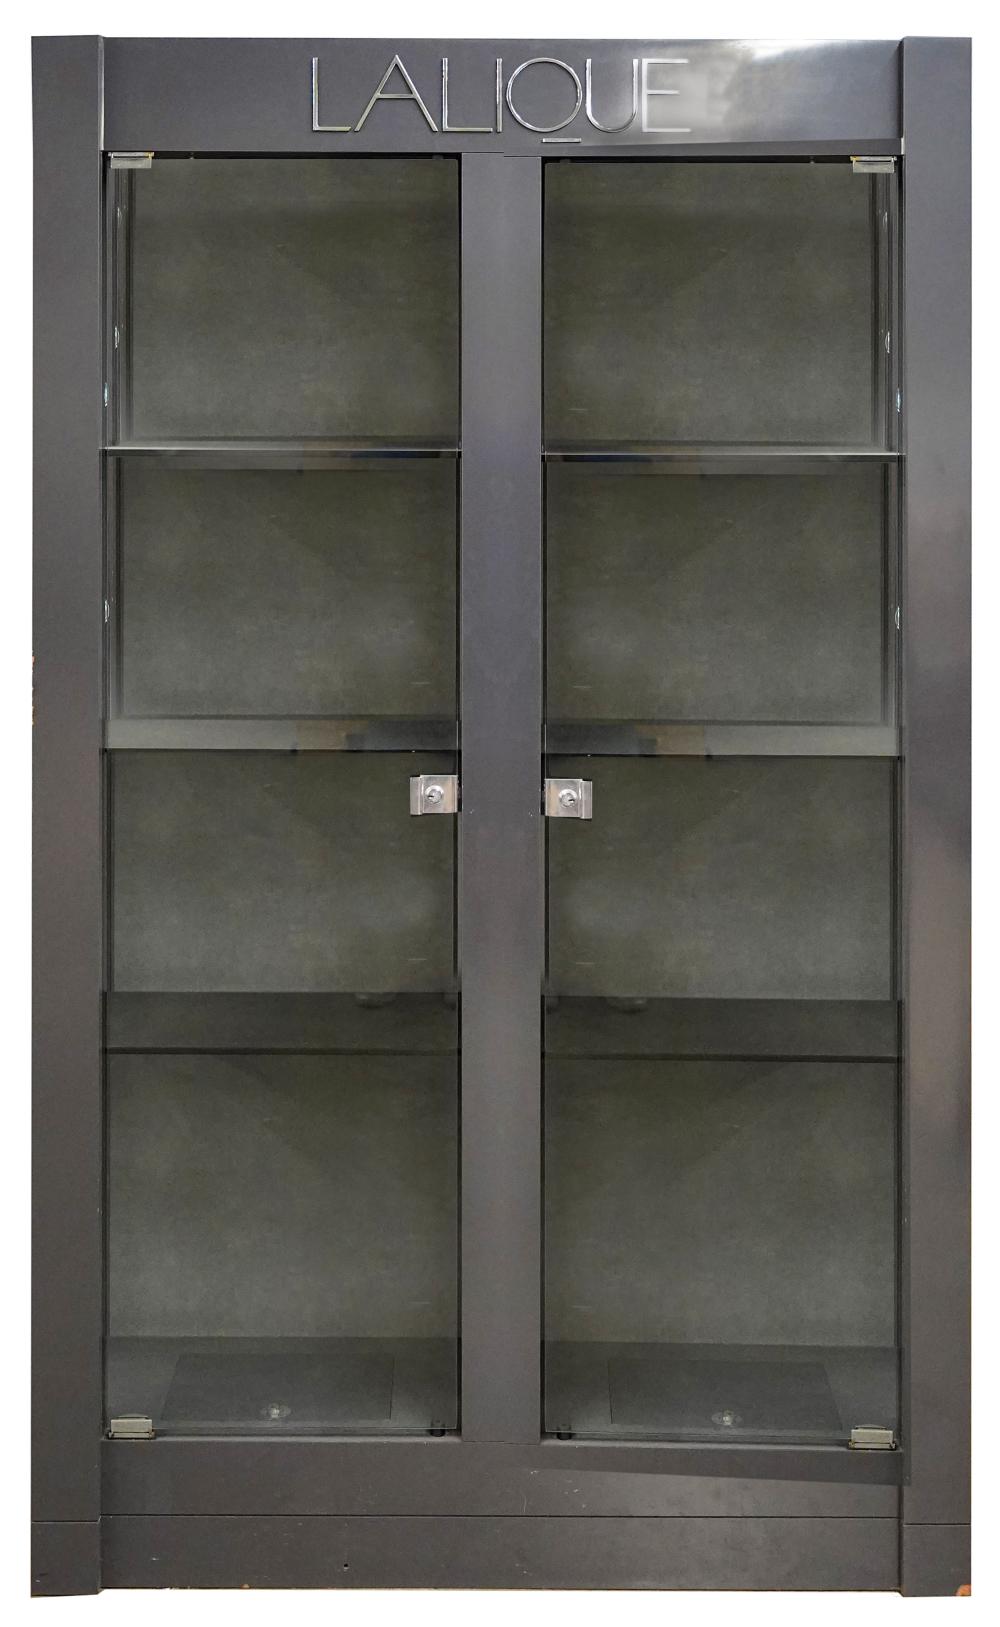 LALIQUE DISPLAY CABINETgrey painted 3301e8